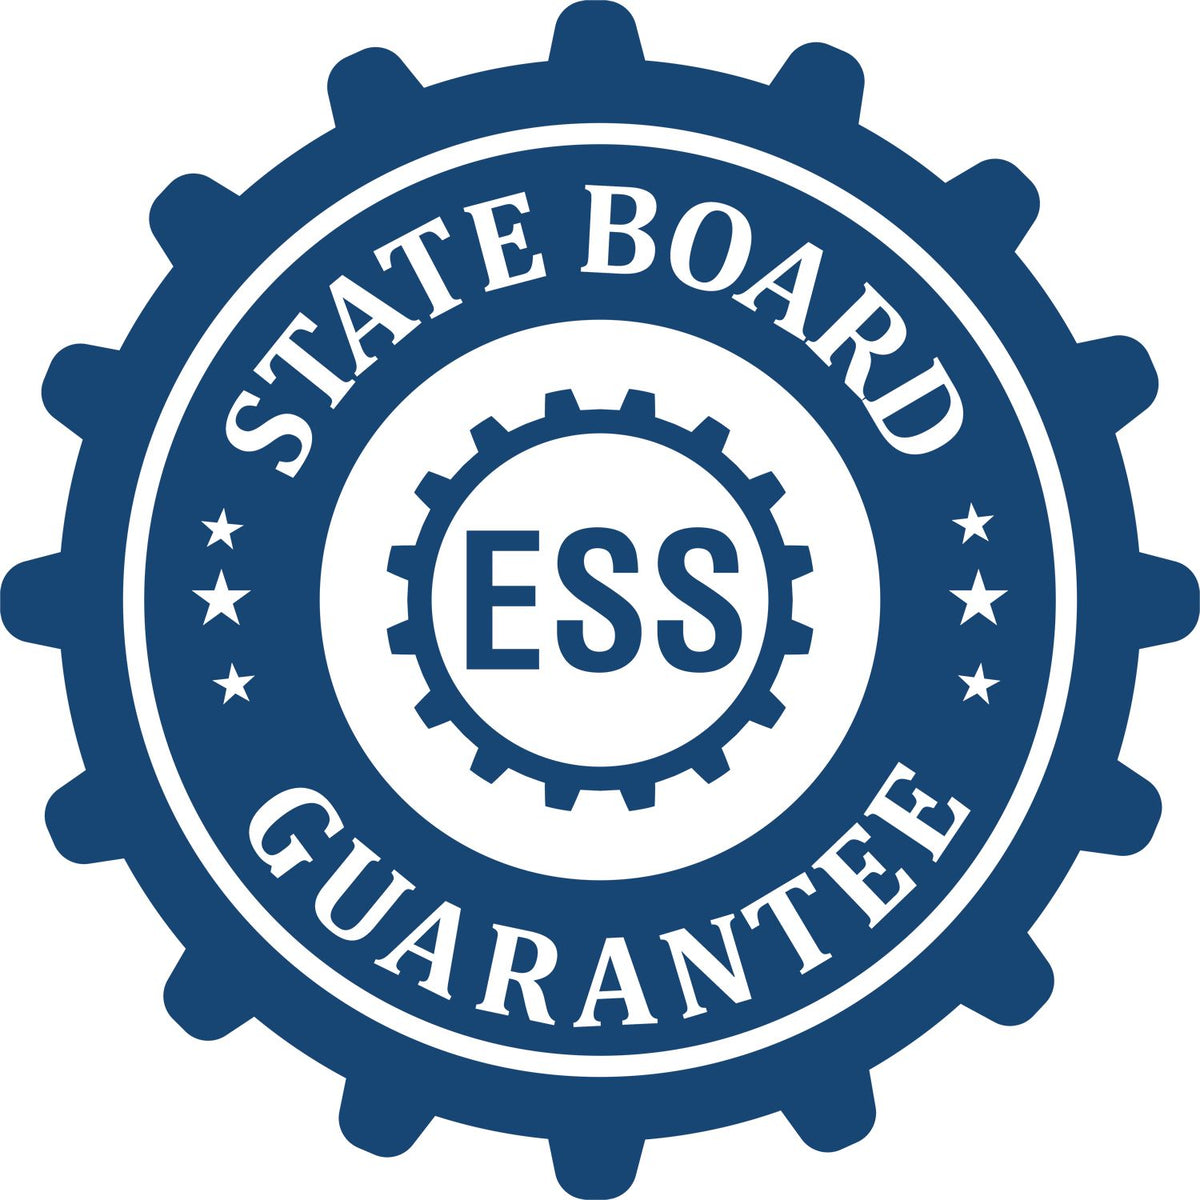 An emblem in a gear shape illustrating a state board guarantee for the State of Oklahoma Extended Long Reach Engineer Seal product.